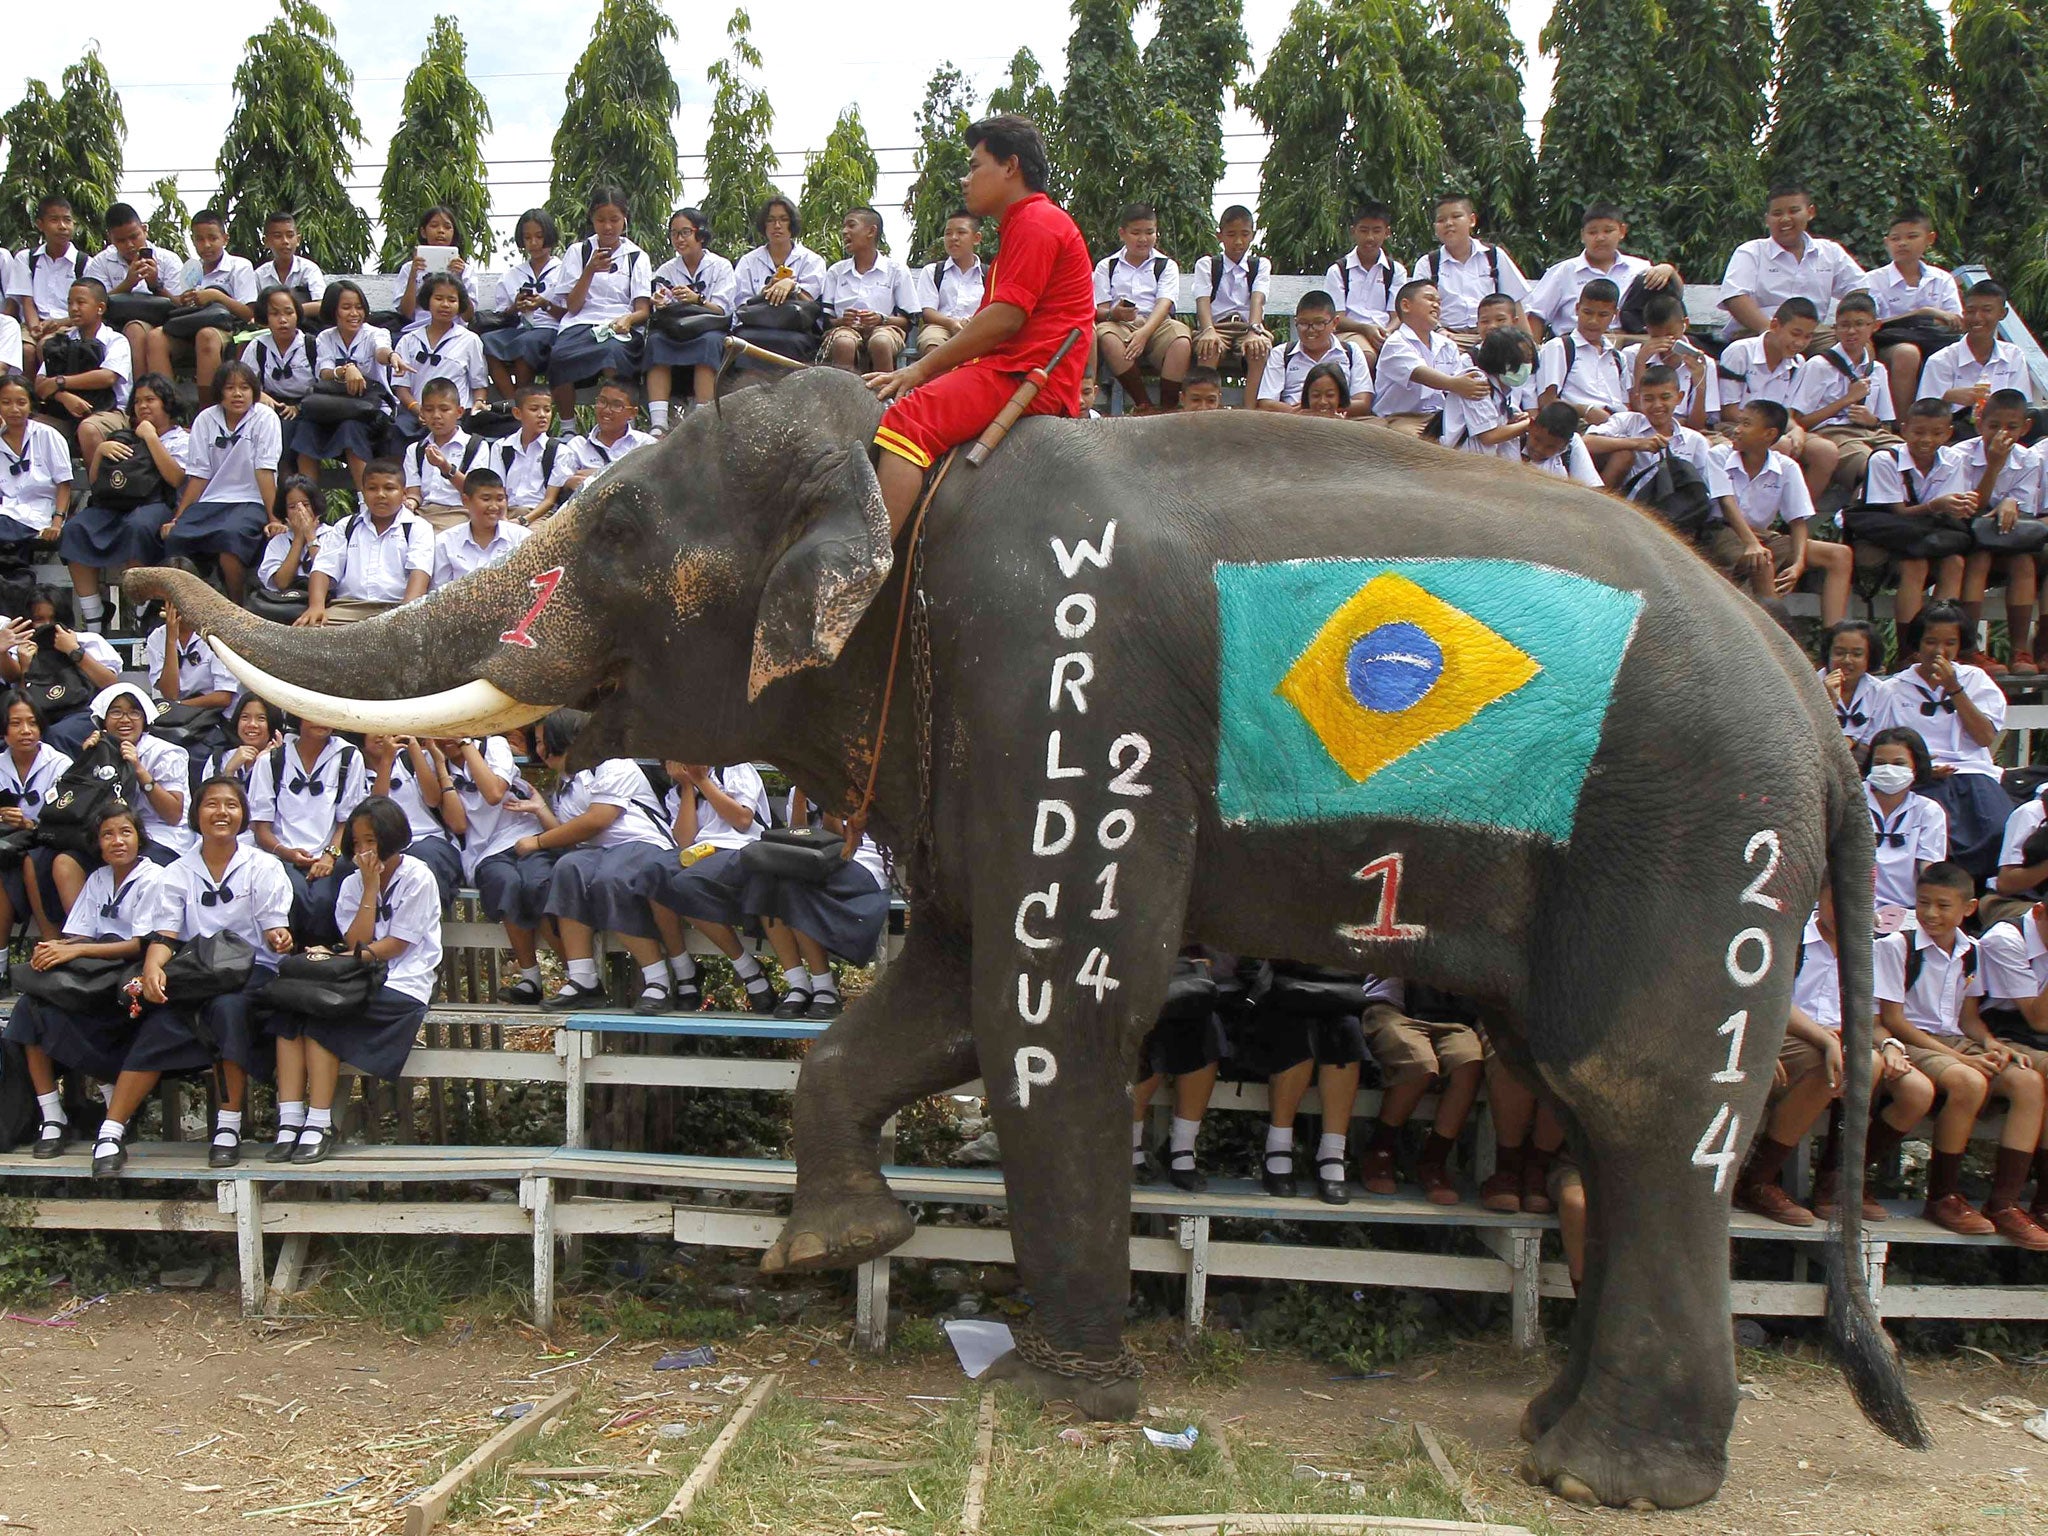 An elephant walks near Thai students at a school in Thailand's Ayutthaya province. A soccer match between the elephants and some students was held as part of a campaign to promote the 2014 World Cup and also to discourage gambling during the competition